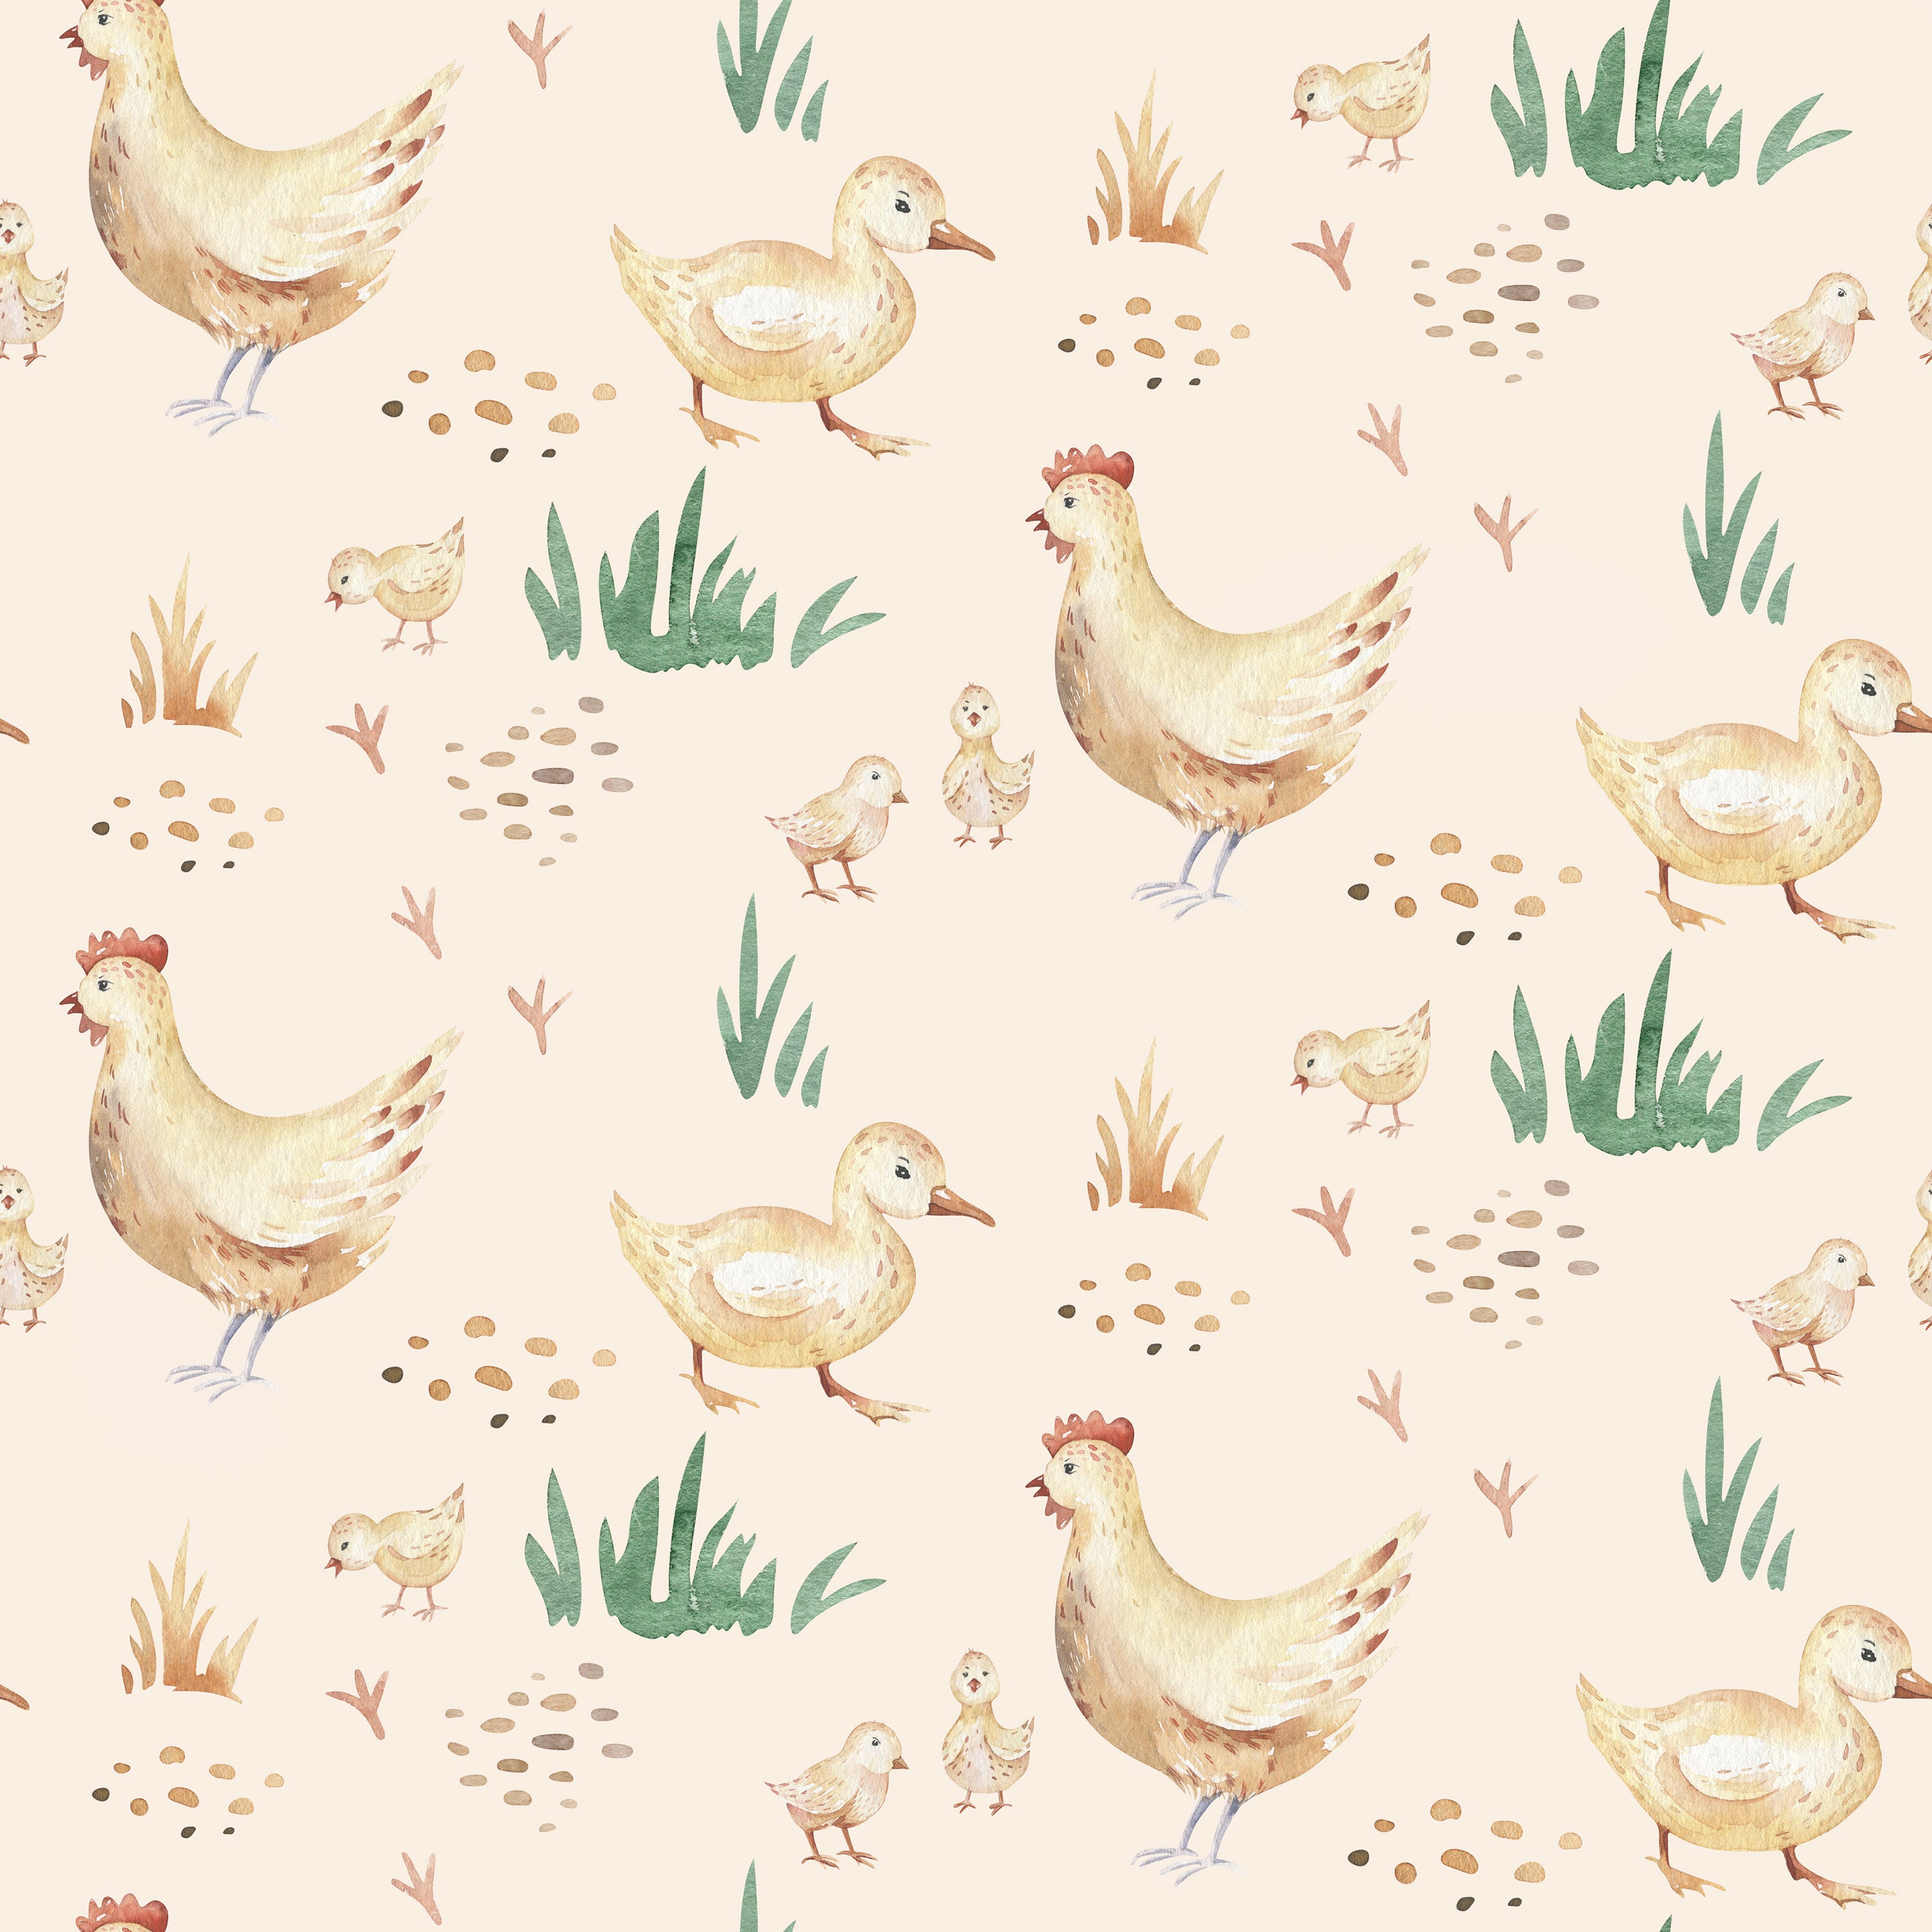 Close-up view of a watercolor wallpaper featuring farm animals. The pattern includes hand-painted illustrations of chickens, chicks, ducks, and ducklings scattered amidst tufts of grass and small pebbles on a soft peach background.